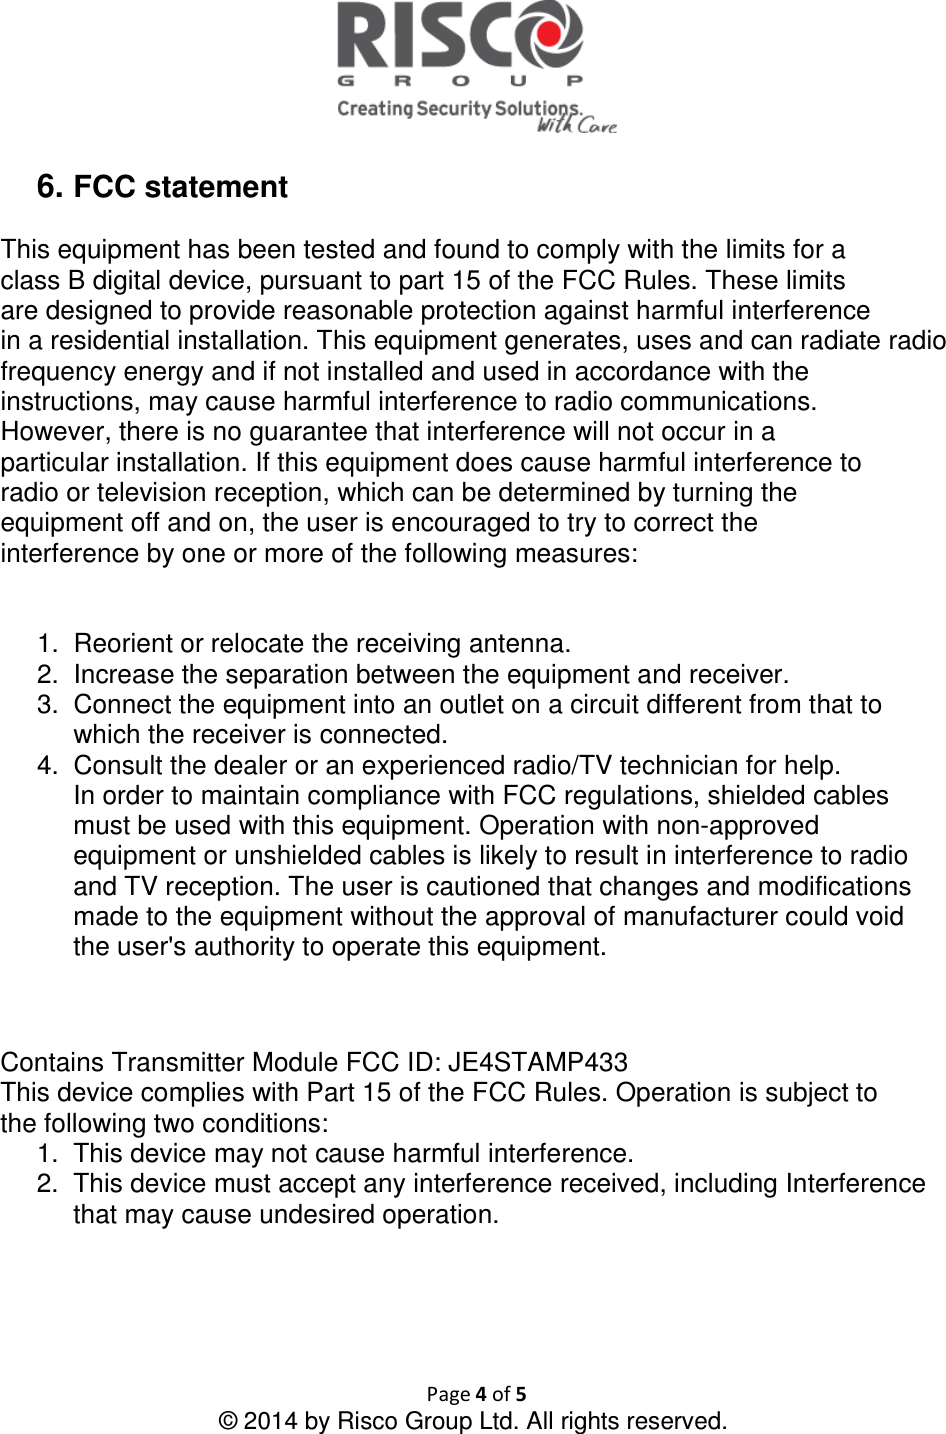  Page 4 of 5 © 2014 by Risco Group Ltd. All rights reserved.   6. FCC statement  This equipment has been tested and found to comply with the limits for a class B digital device, pursuant to part 15 of the FCC Rules. These limits are designed to provide reasonable protection against harmful interference in a residential installation. This equipment generates, uses and can radiate radio frequency energy and if not installed and used in accordance with the instructions, may cause harmful interference to radio communications. However, there is no guarantee that interference will not occur in a particular installation. If this equipment does cause harmful interference to radio or television reception, which can be determined by turning the equipment off and on, the user is encouraged to try to correct the interference by one or more of the following measures:   1.  Reorient or relocate the receiving antenna. 2.  Increase the separation between the equipment and receiver. 3.  Connect the equipment into an outlet on a circuit different from that to which the receiver is connected. 4.  Consult the dealer or an experienced radio/TV technician for help. In order to maintain compliance with FCC regulations, shielded cables must be used with this equipment. Operation with non-approved equipment or unshielded cables is likely to result in interference to radio and TV reception. The user is cautioned that changes and modifications made to the equipment without the approval of manufacturer could void the user&apos;s authority to operate this equipment.   Contains Transmitter Module FCC ID: JE4STAMP433 This device complies with Part 15 of the FCC Rules. Operation is subject to the following two conditions: 1.  This device may not cause harmful interference. 2.  This device must accept any interference received, including Interference that may cause undesired operation.    